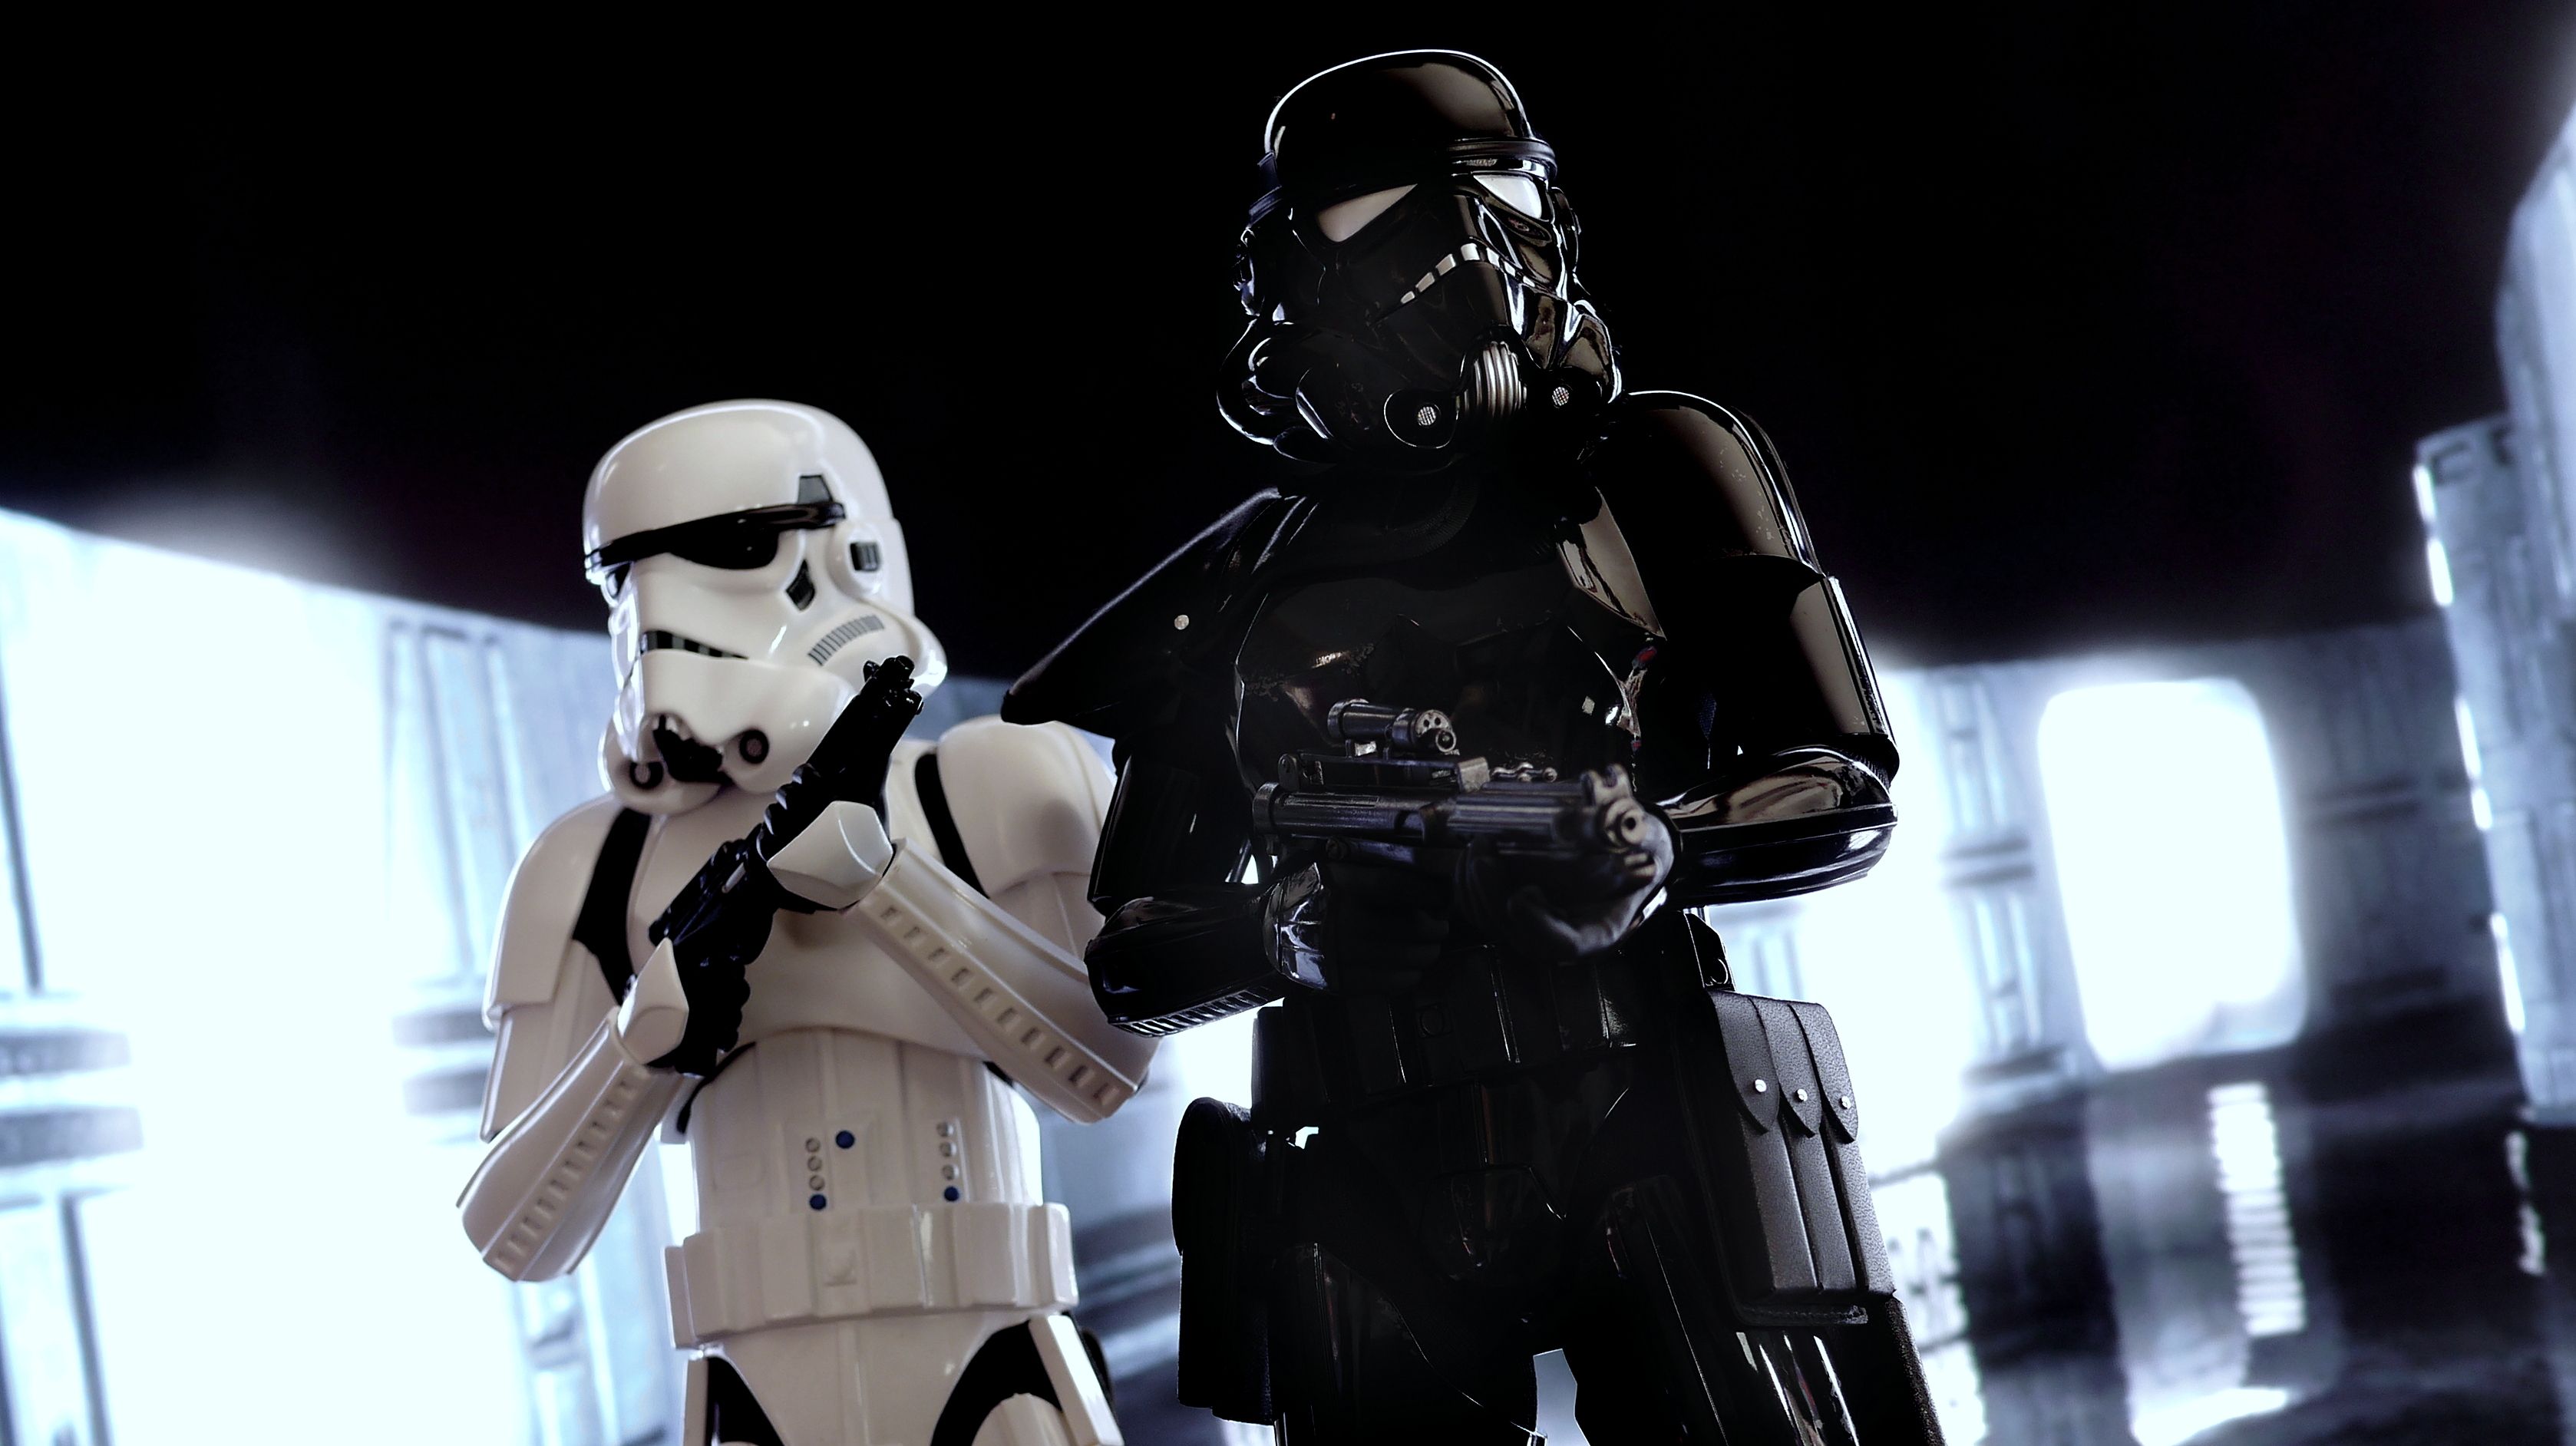 Wallpaper, shadow, Trooper, hot, souls, Toy, toys, star, stormtrooper, Imperial, rah, wars, exclusive, medicom, hottoys 3356x1884